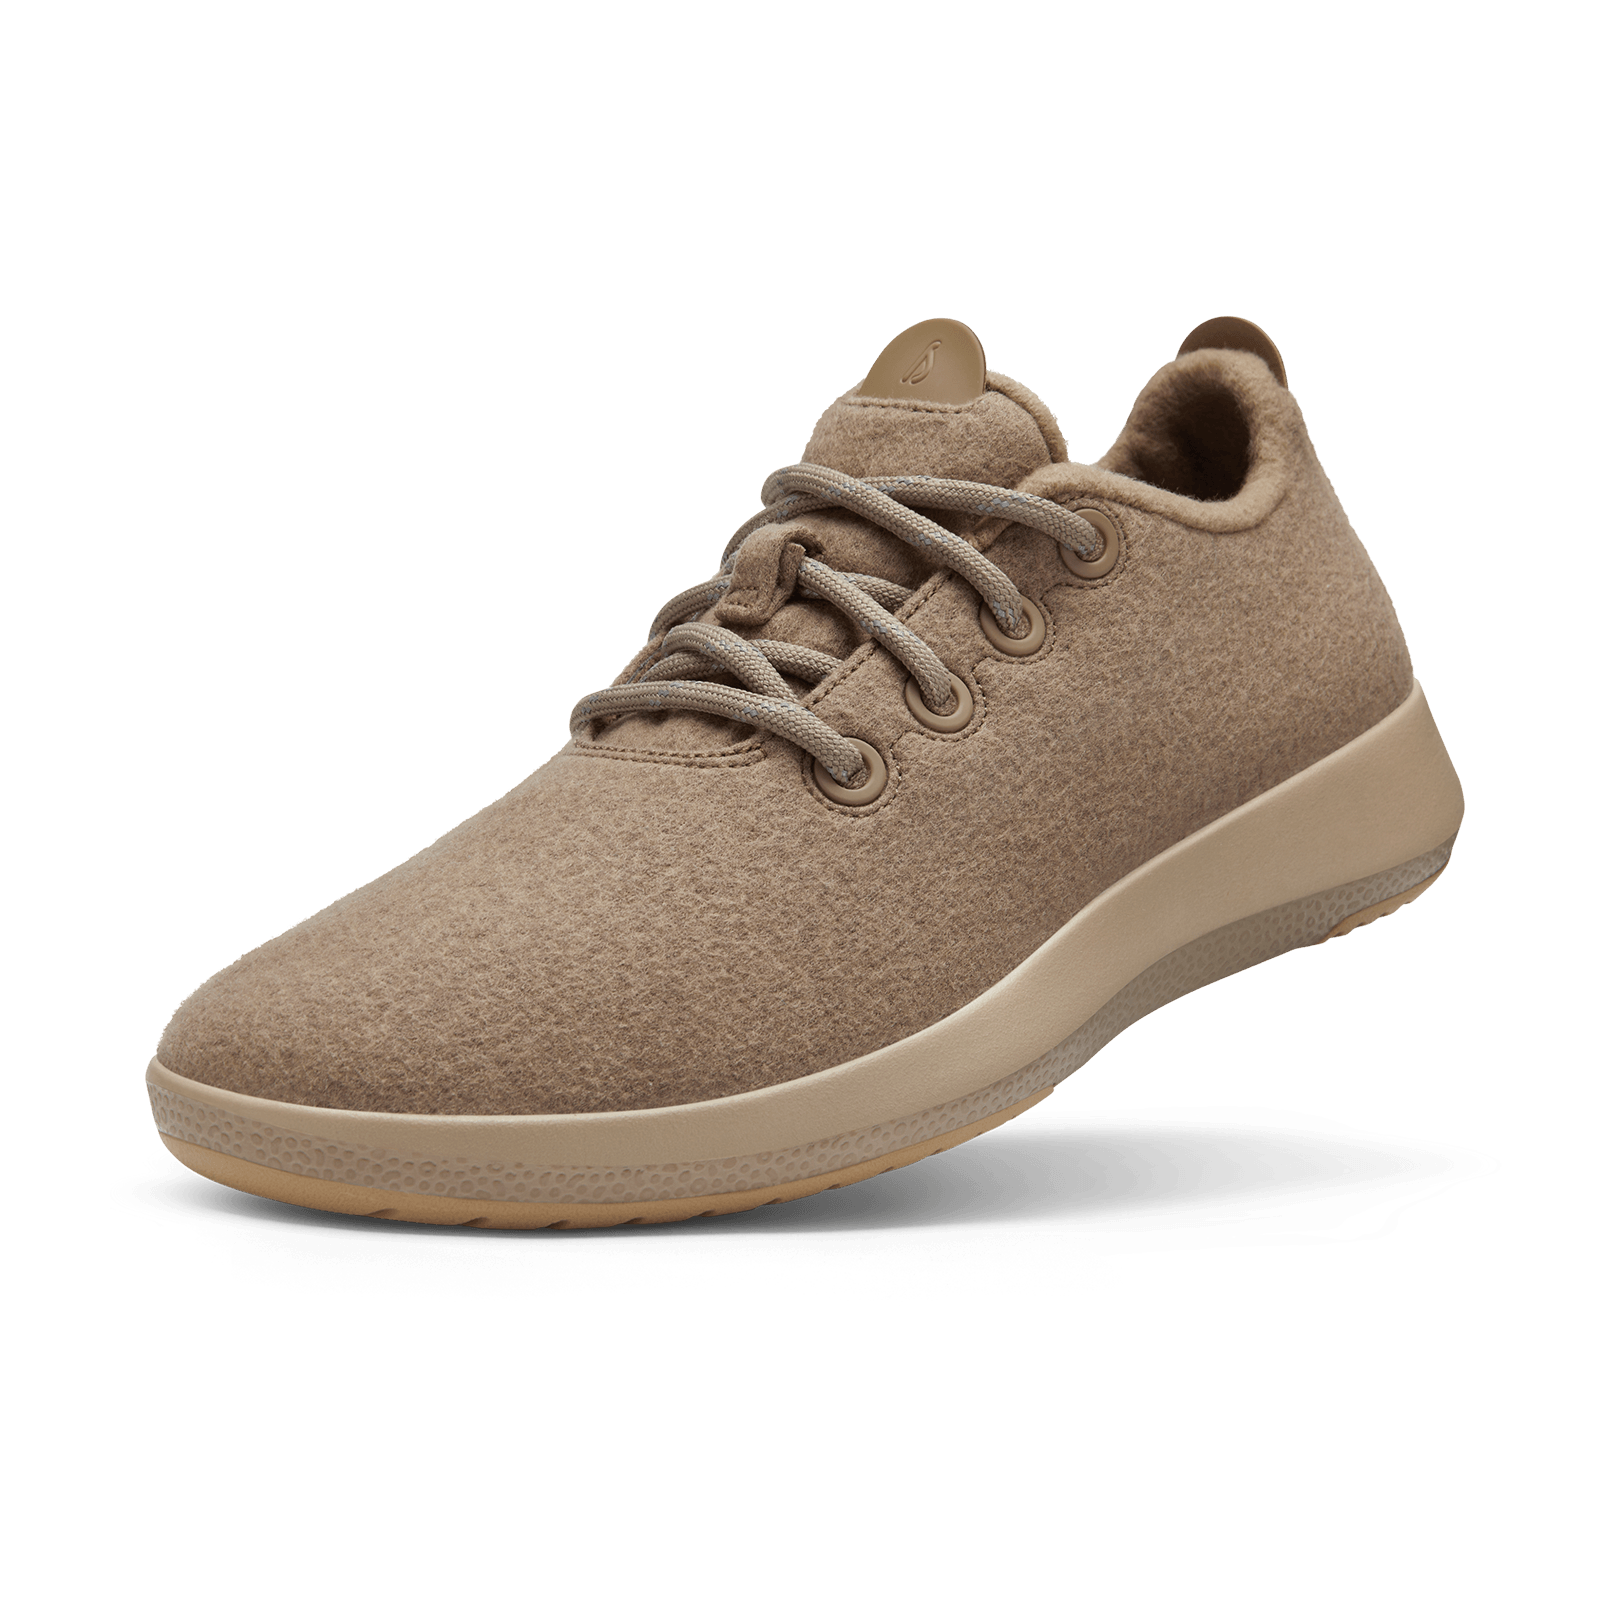 Women's Wool Runners - Stormy Mauve (Stormy Mauve Sole)